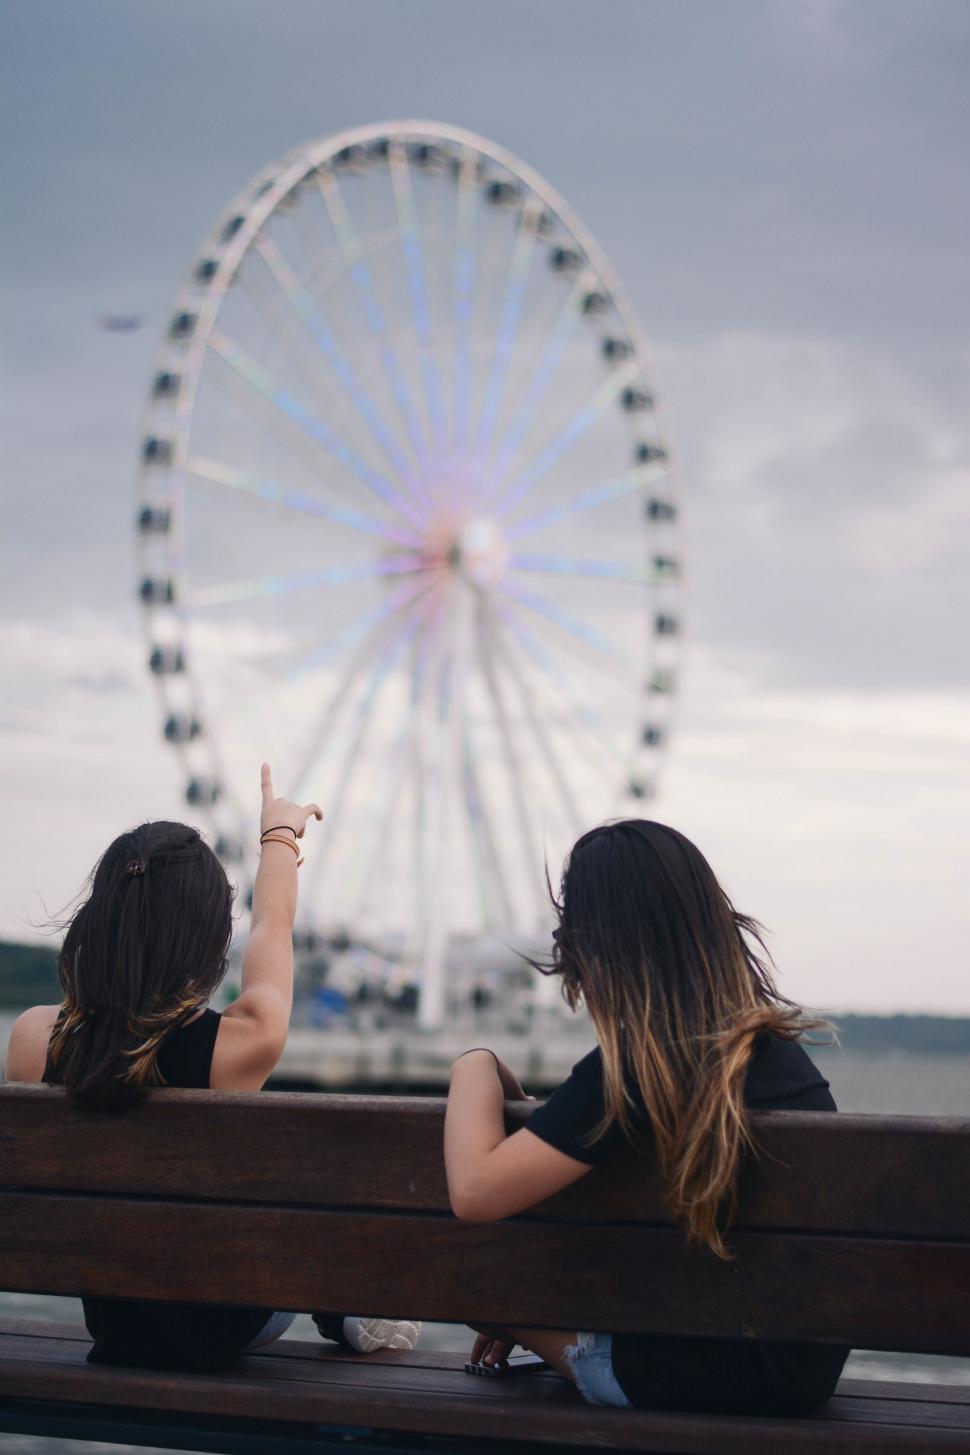 Free Image of Two Women Sitting on a Bench in Front of a Ferris Wheel 